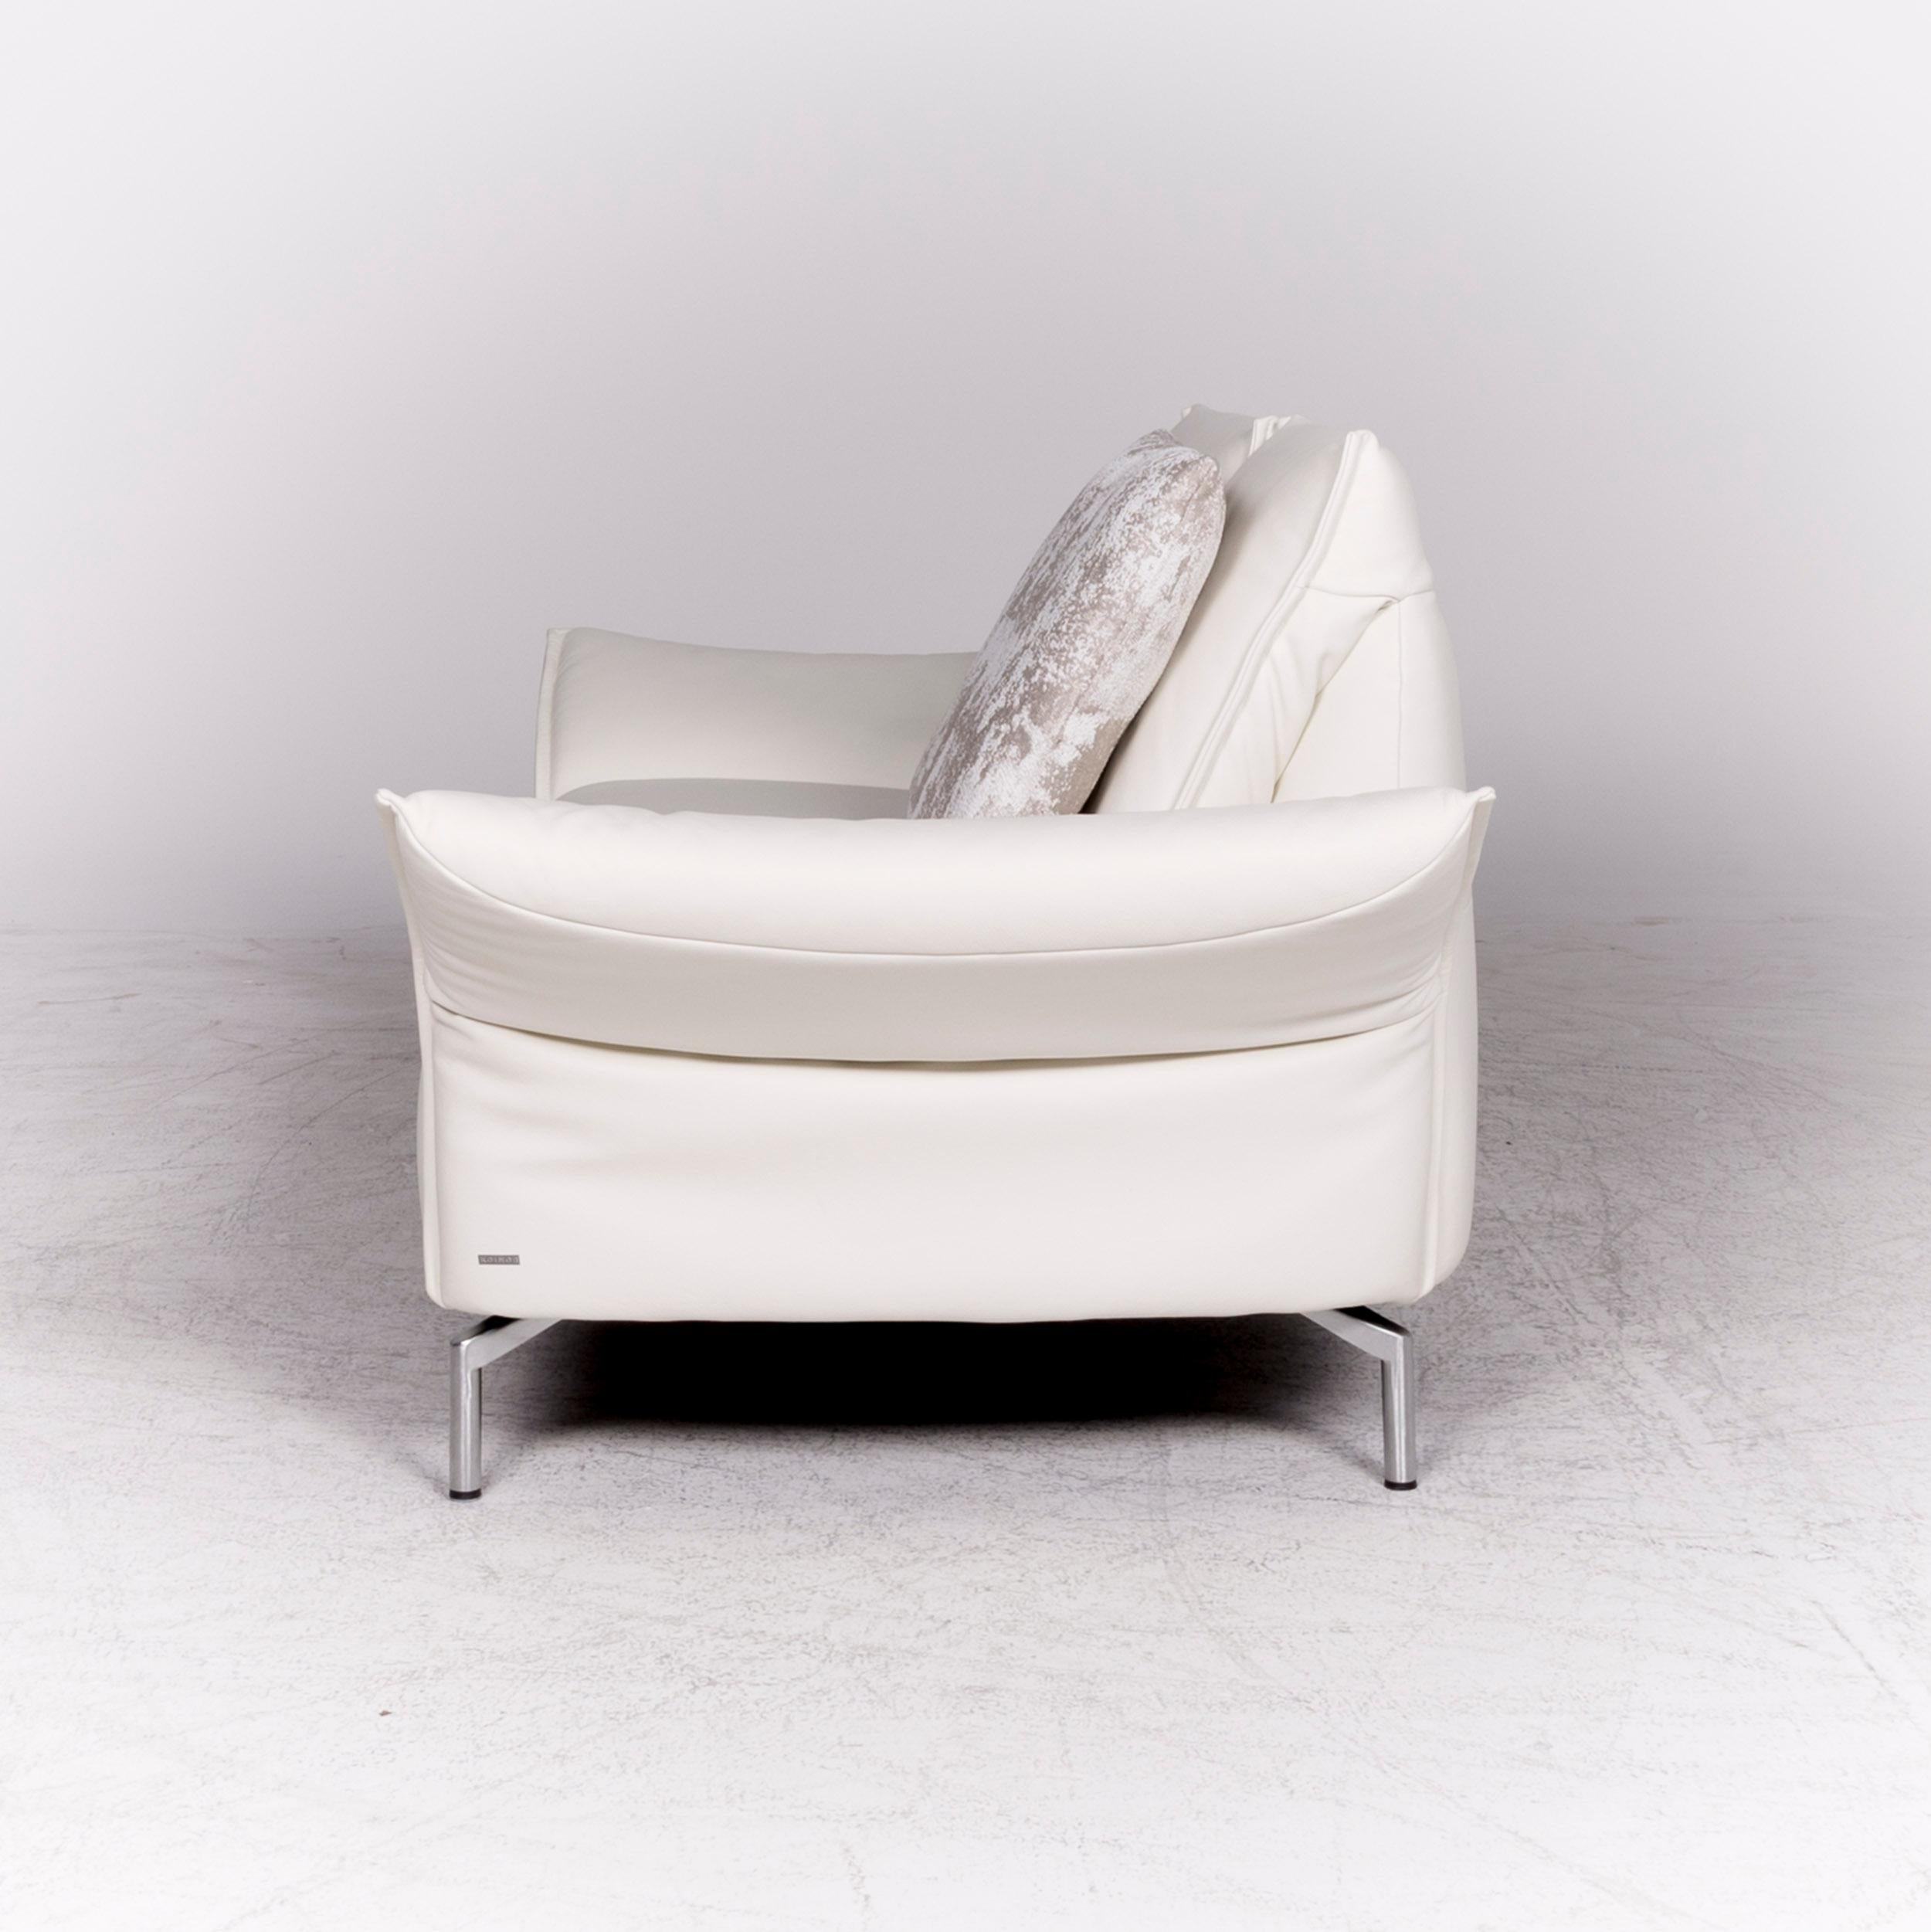 Koinor Vanda Designer Leather Sofa White Real Leather Two-Seat Couch 3